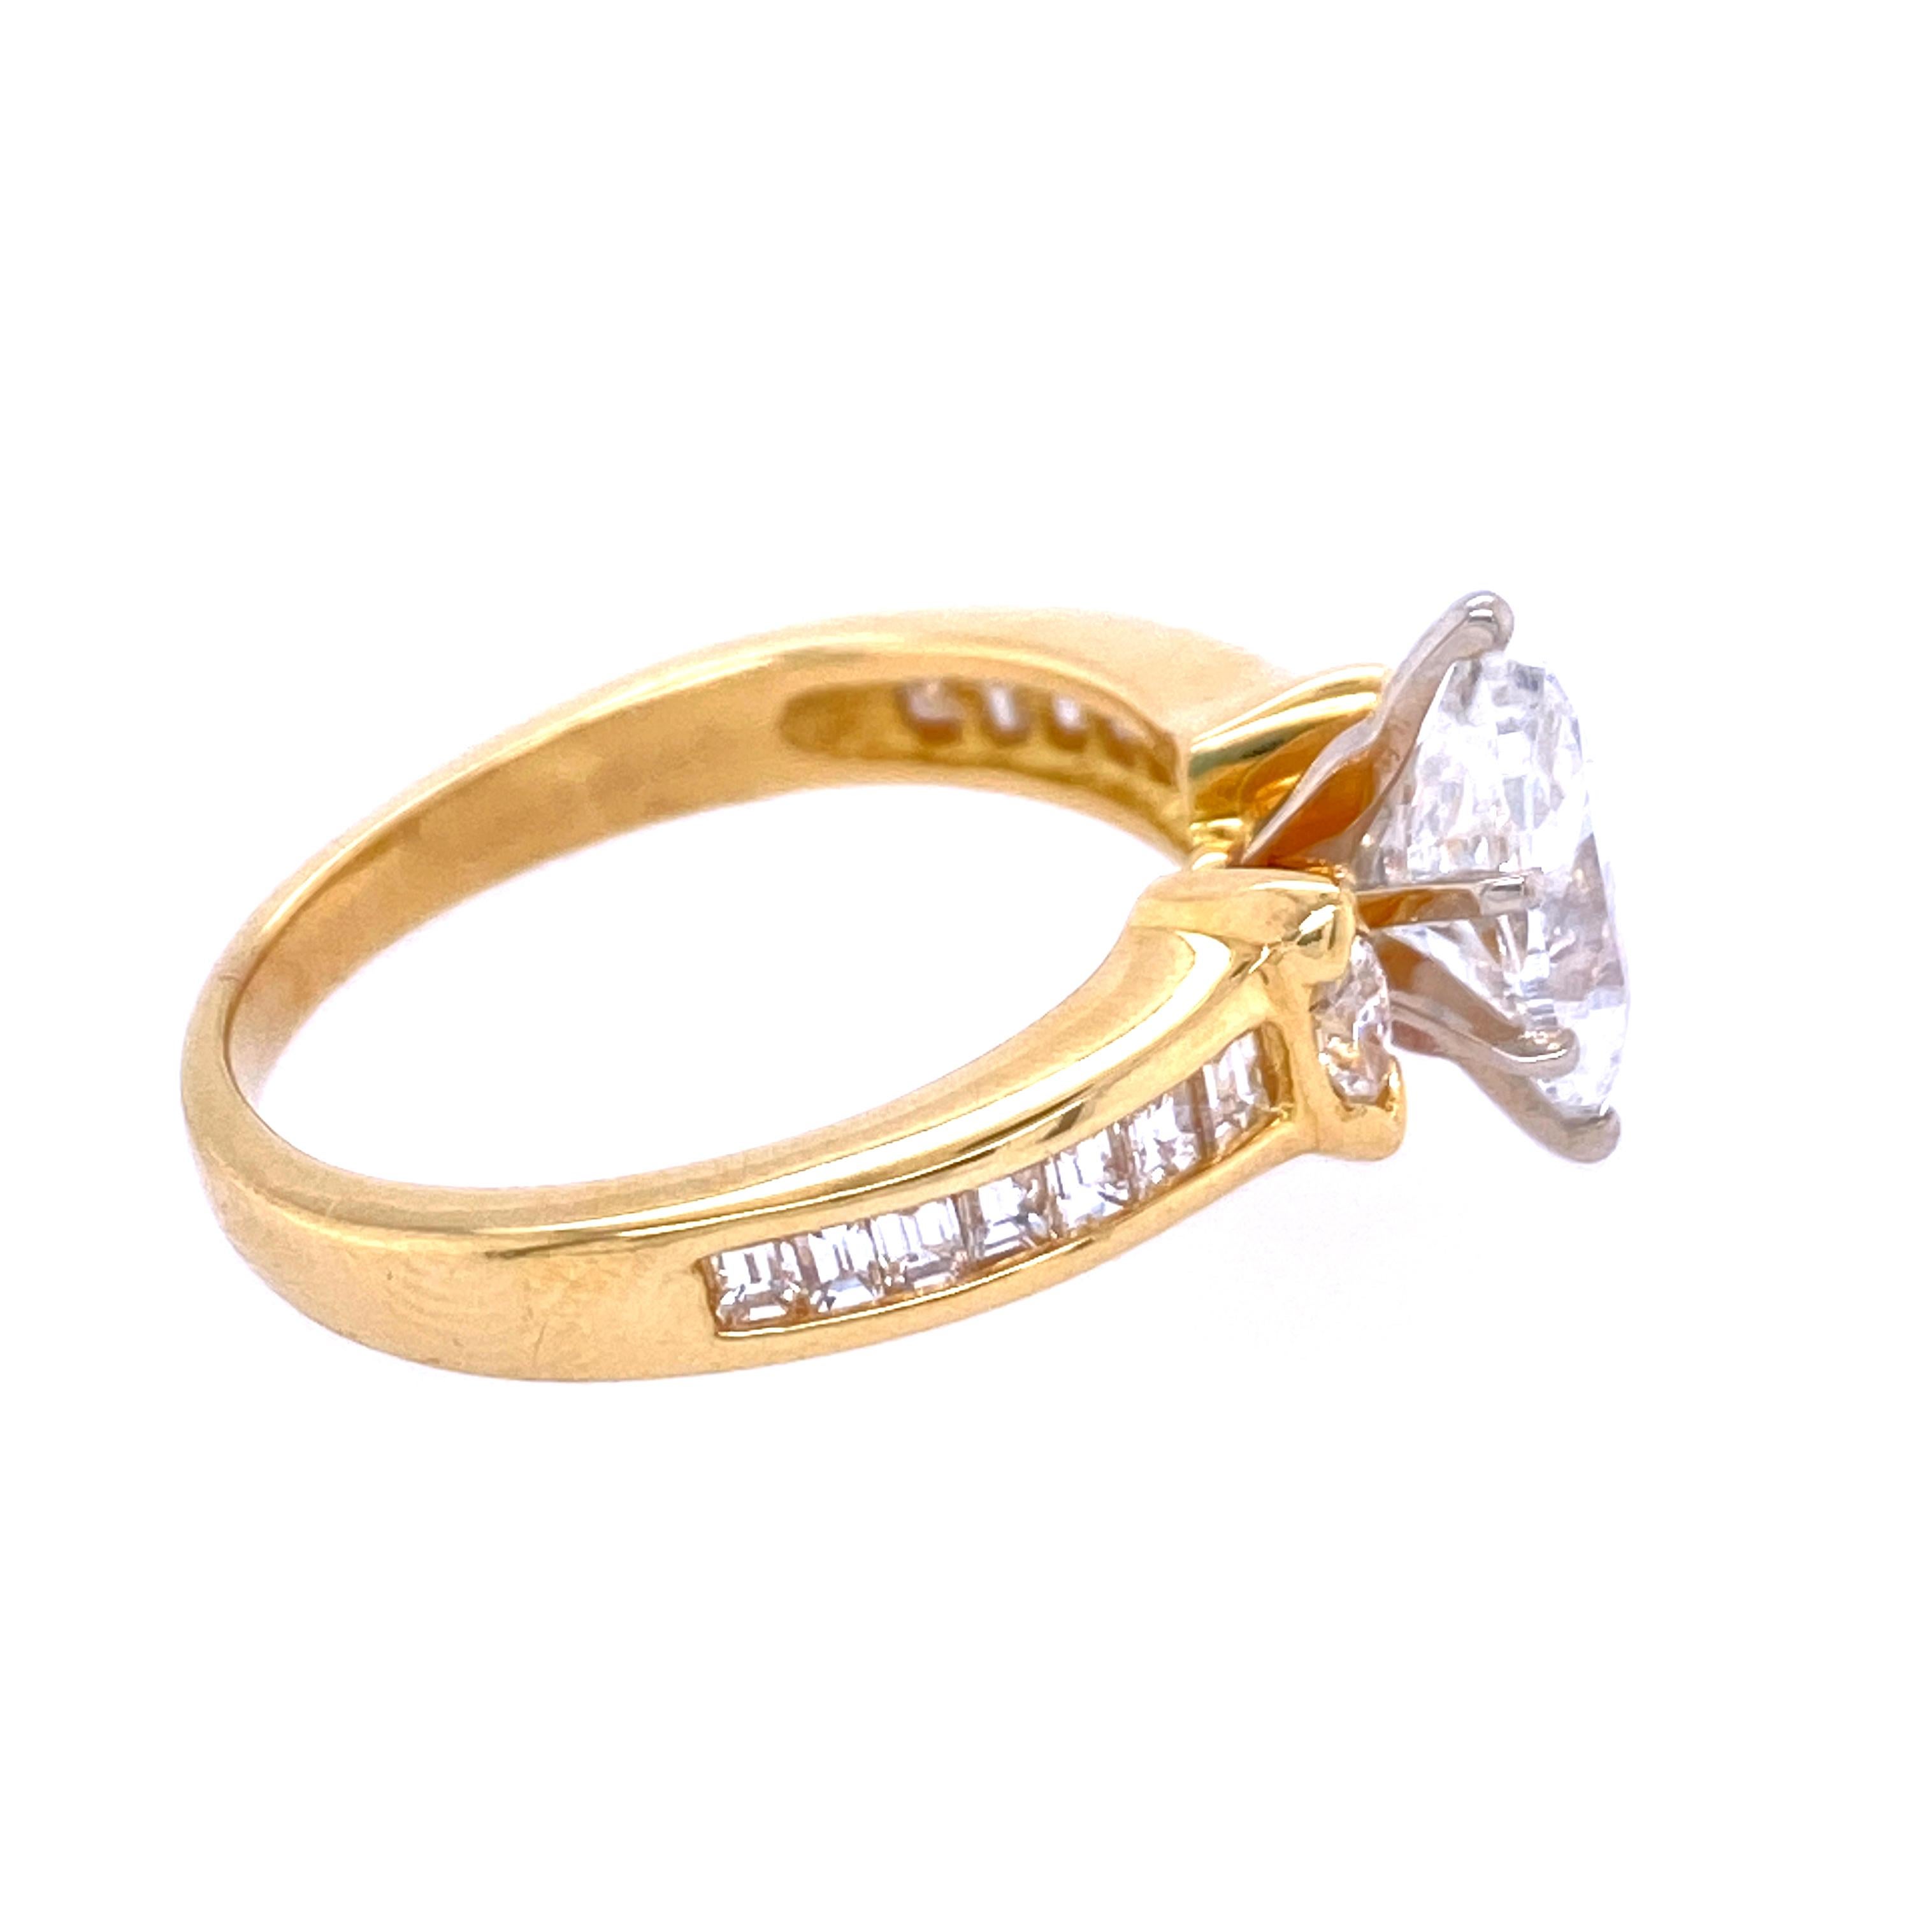 One 18 karat yellow gold (stamped 18K) engagement ring prong set with one marquise cut diamond, approximately  1.33 carat total weight with I color and I1 clarity measuring ....
the diamond is flanked by two marquise cut diamonds, 4x2.5mm each,